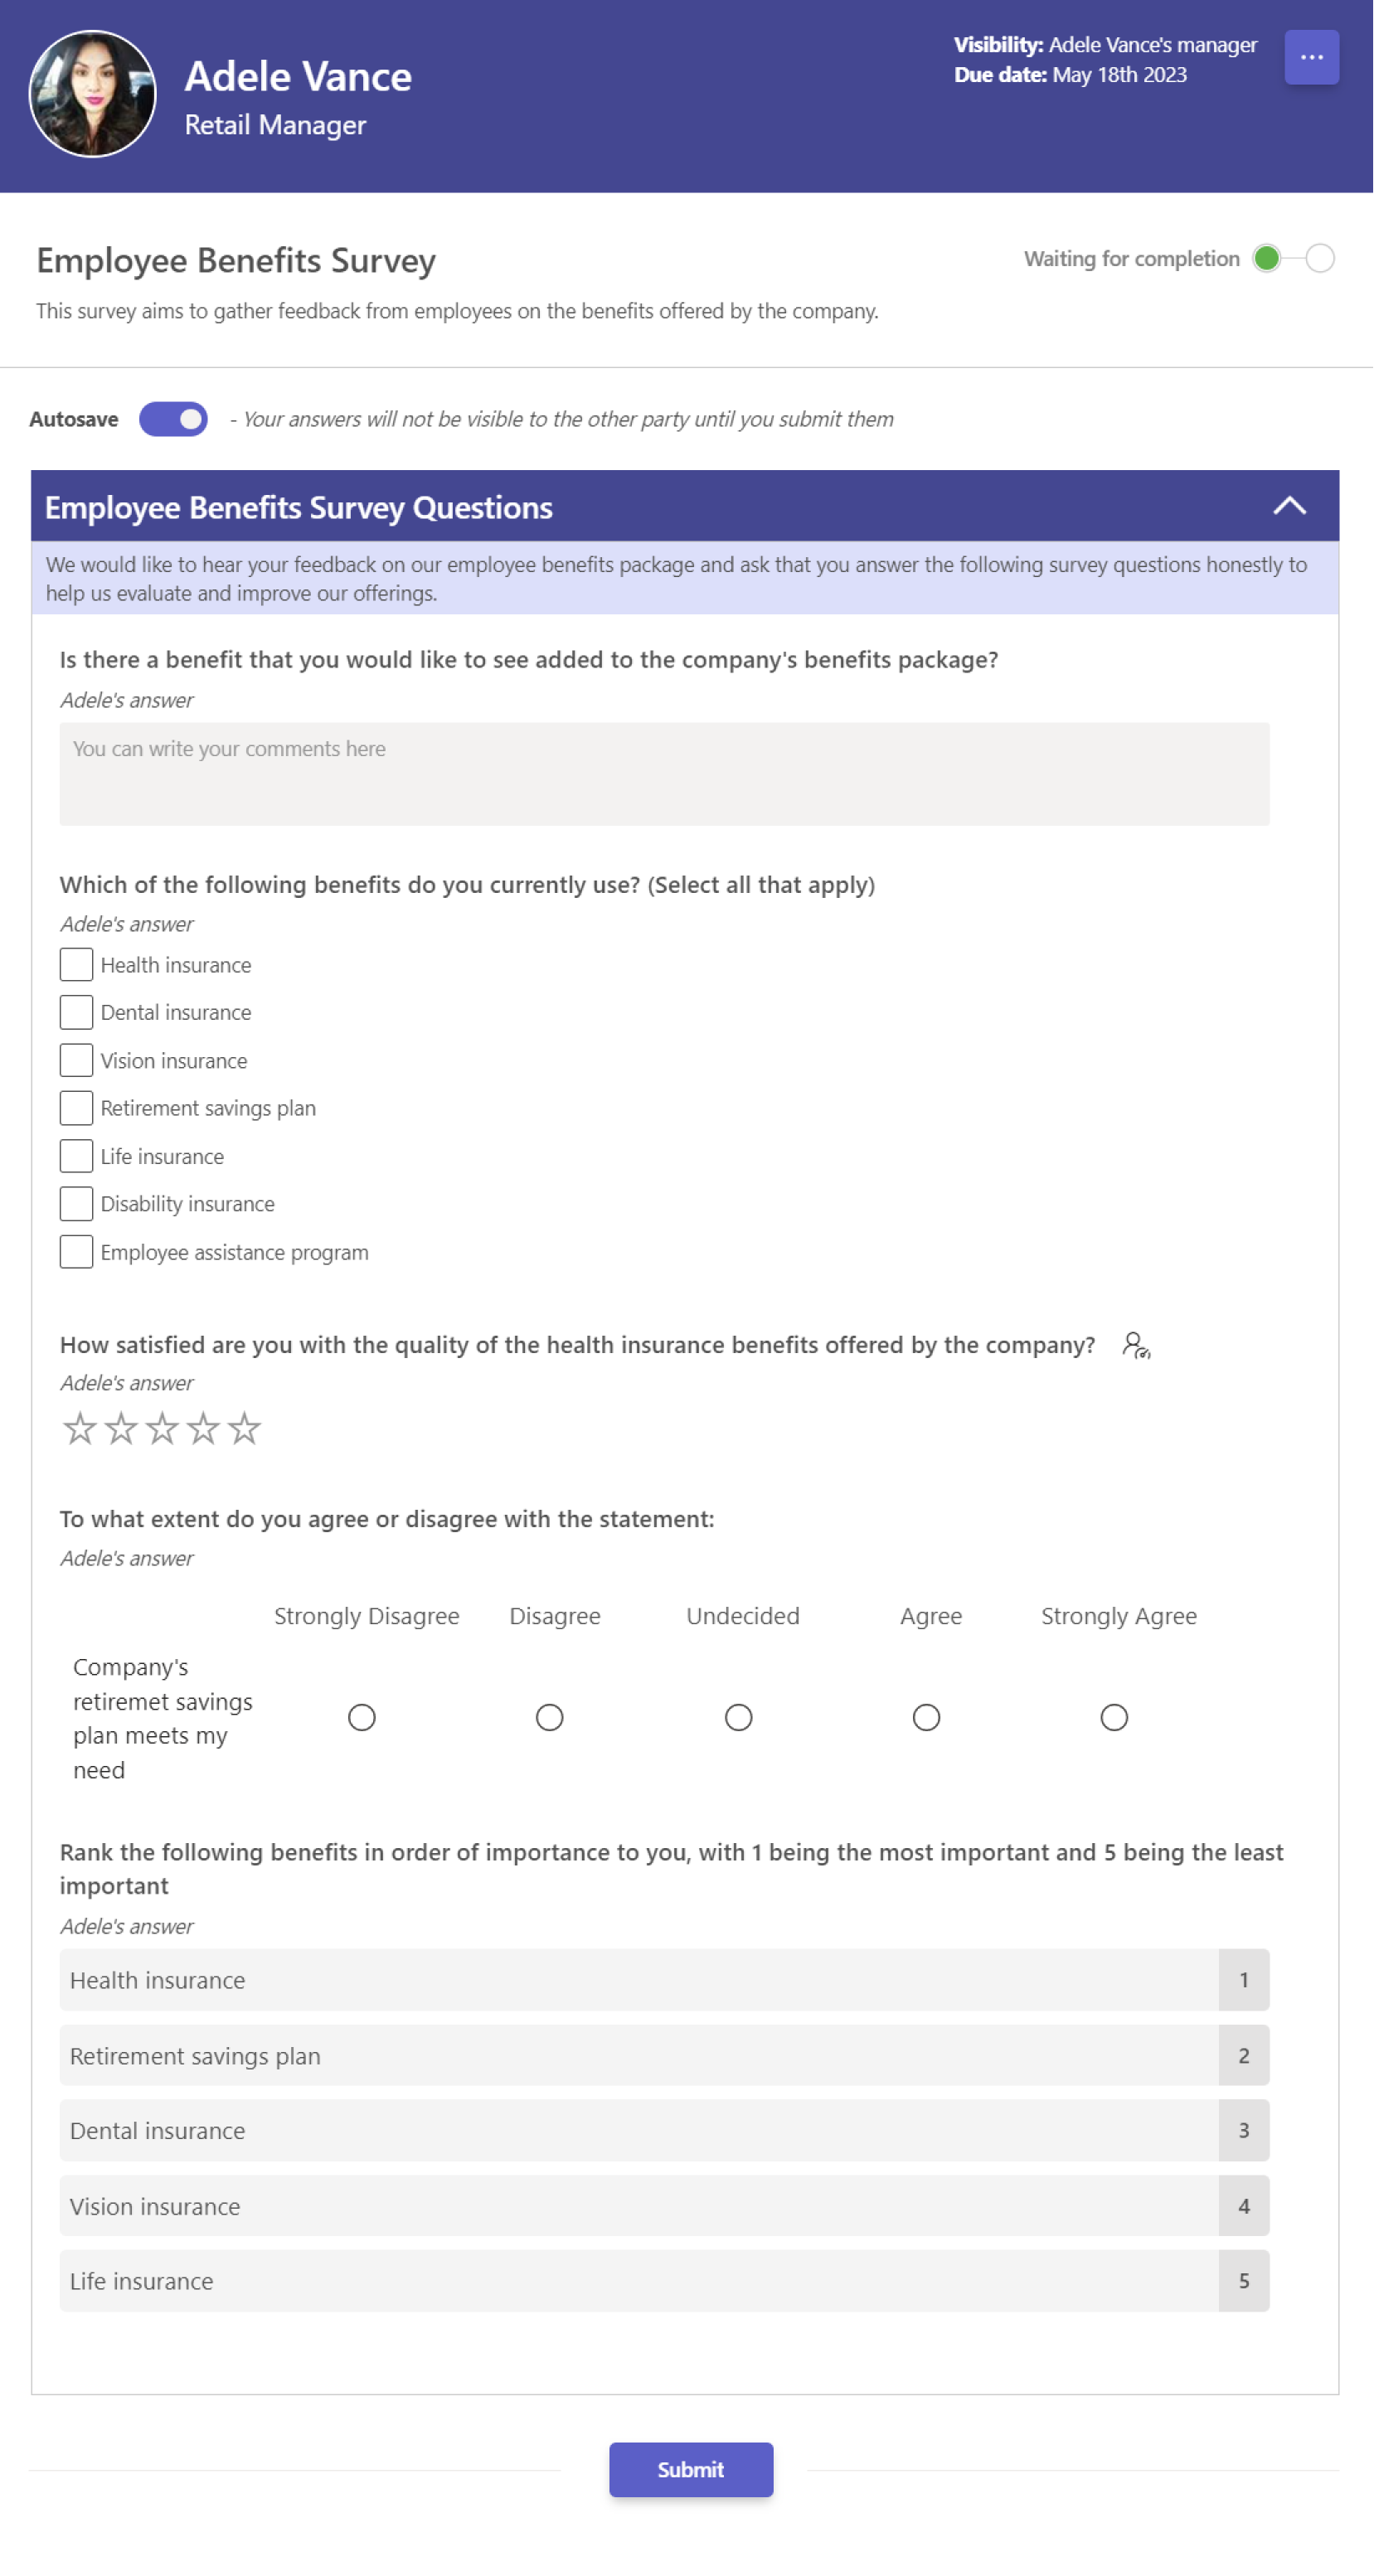 teamflect employee benefits survey template with questions